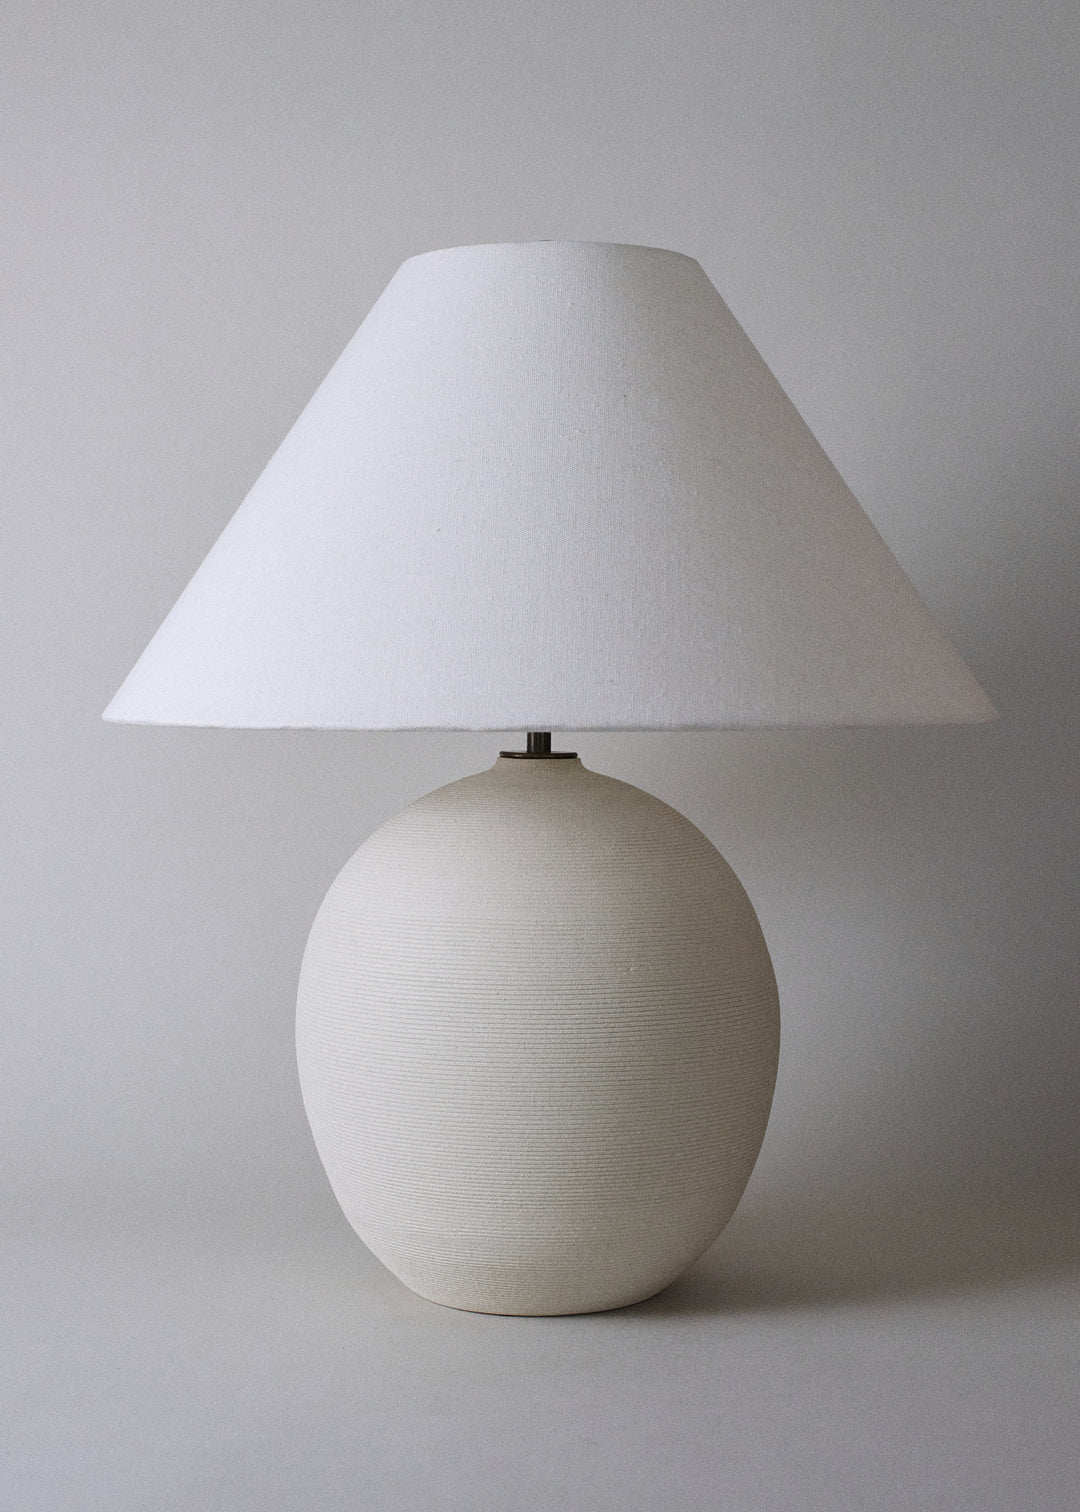 Large Orb Lamp in Combed Chalk Empire Shade - Victoria Morris Pottery